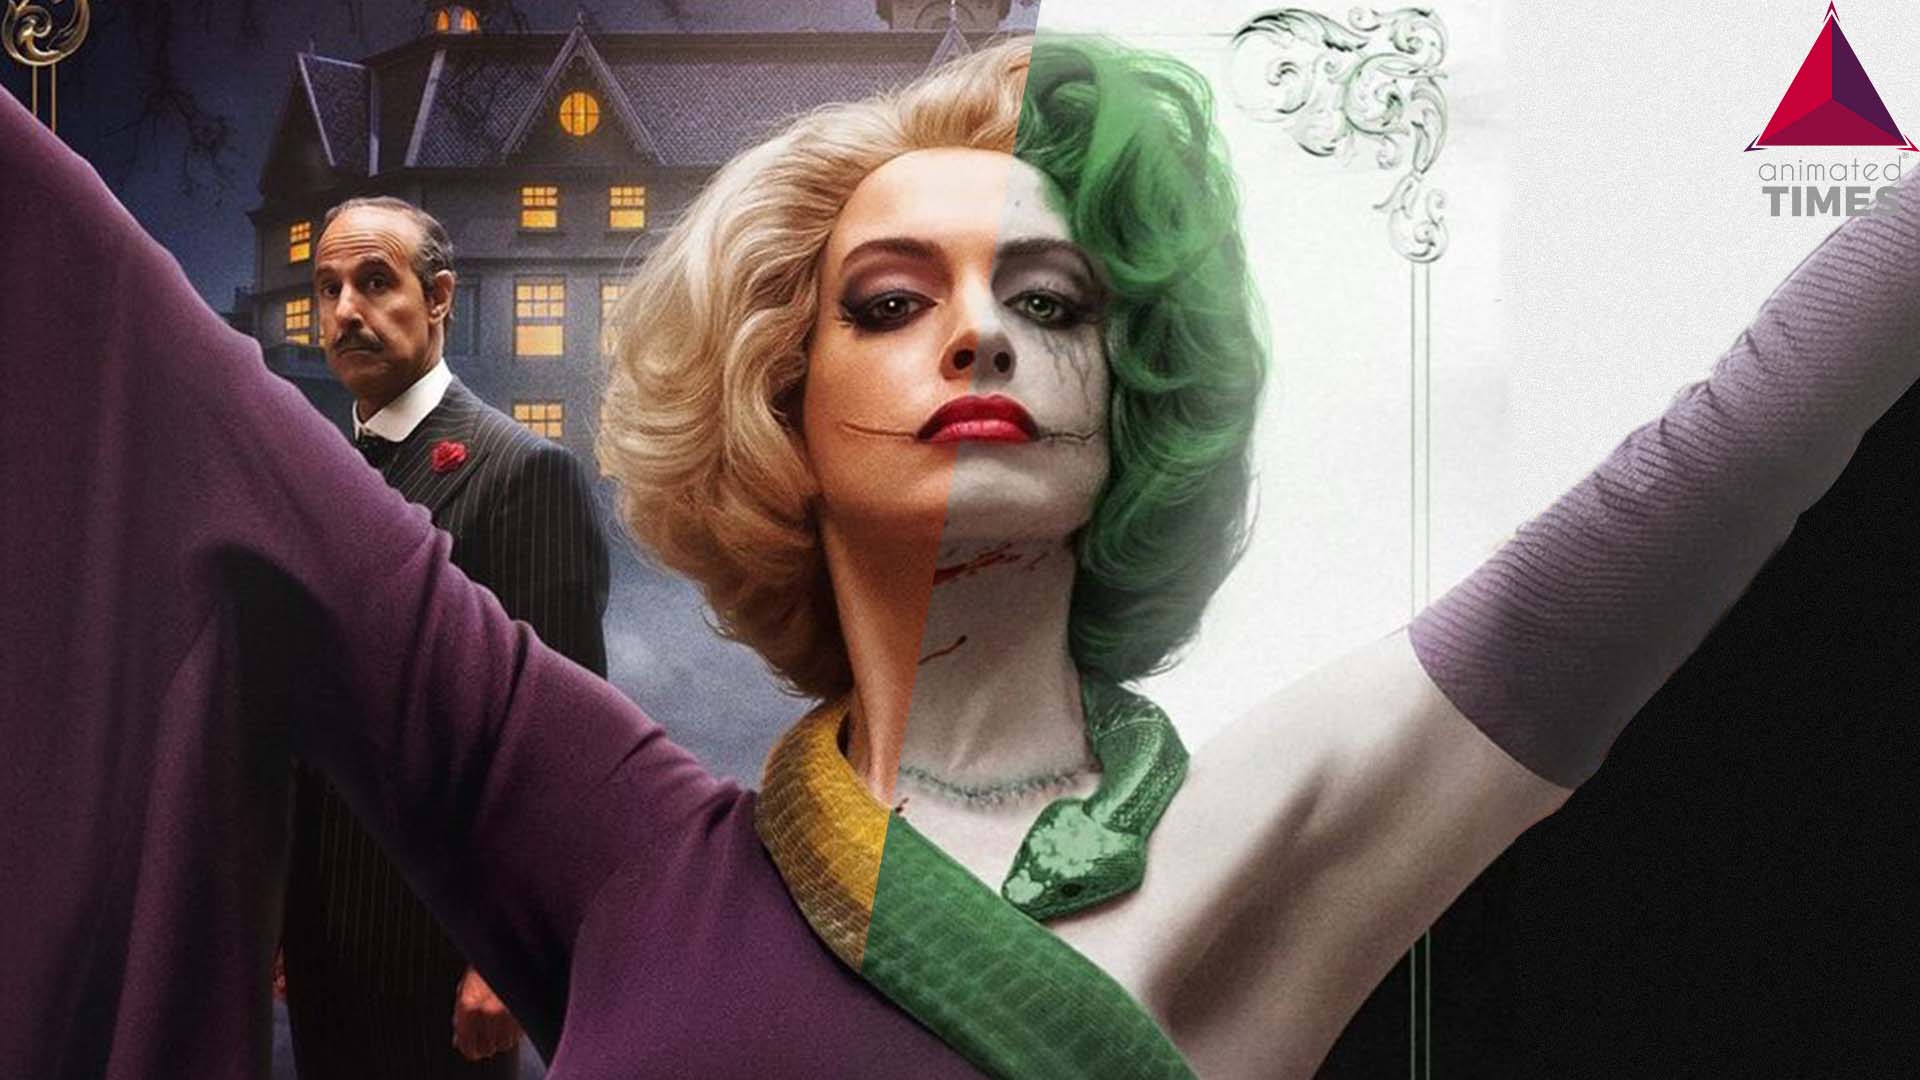 Heres How Anne Hathaway Could Look Like As DCs Female Joker In The Flash Movie